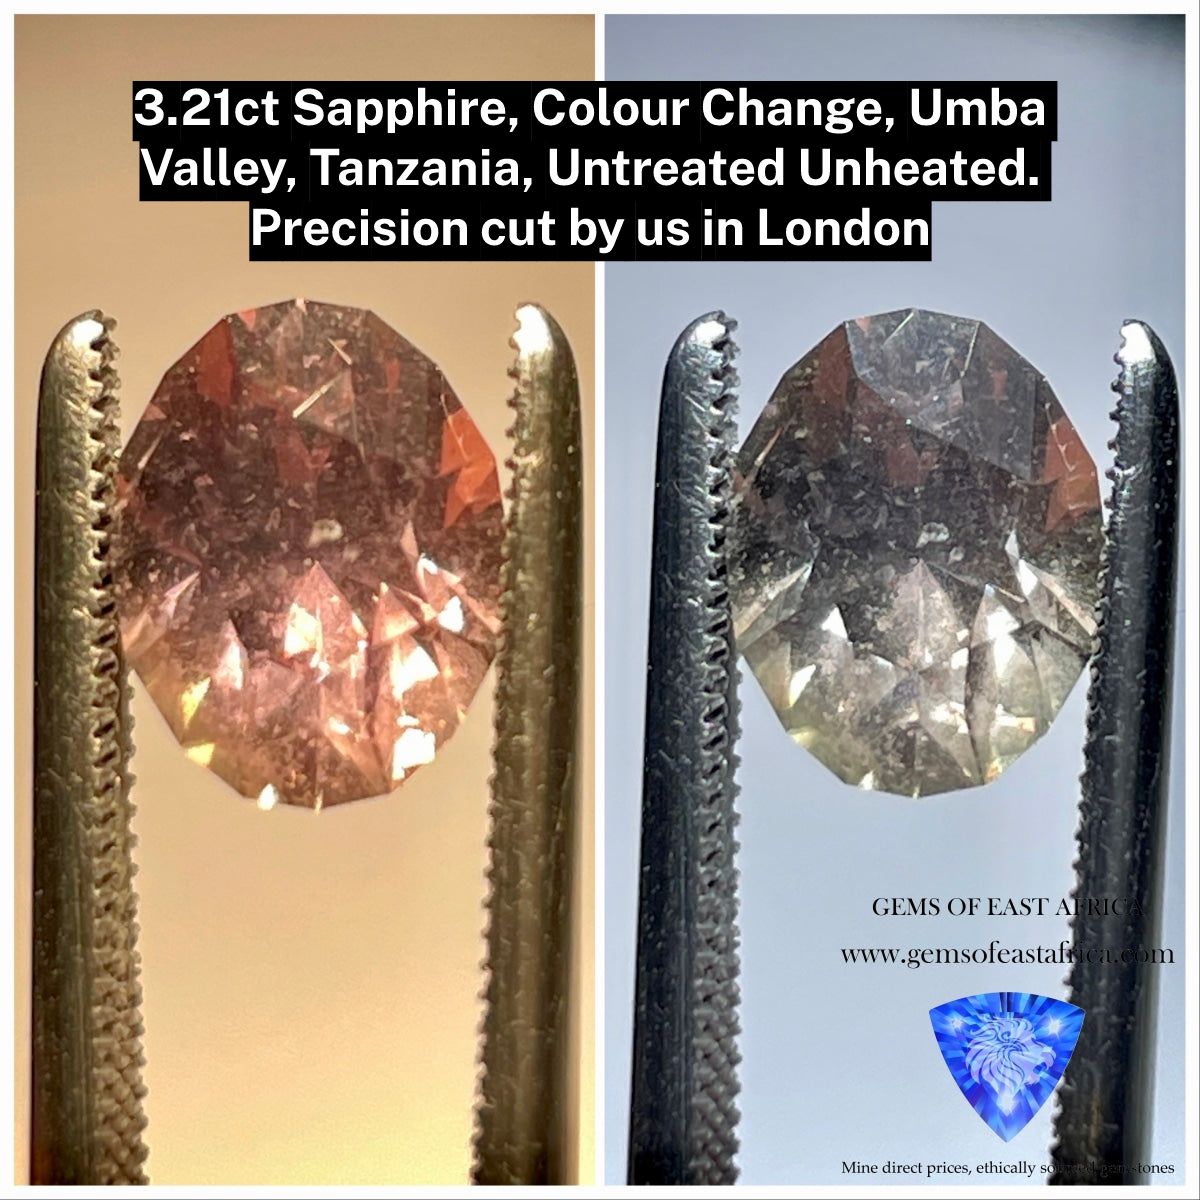 3.21Ct Sapphire Colour Change Umba Valley Tanzania Untreated Unheated. Precision Cut By Us In London